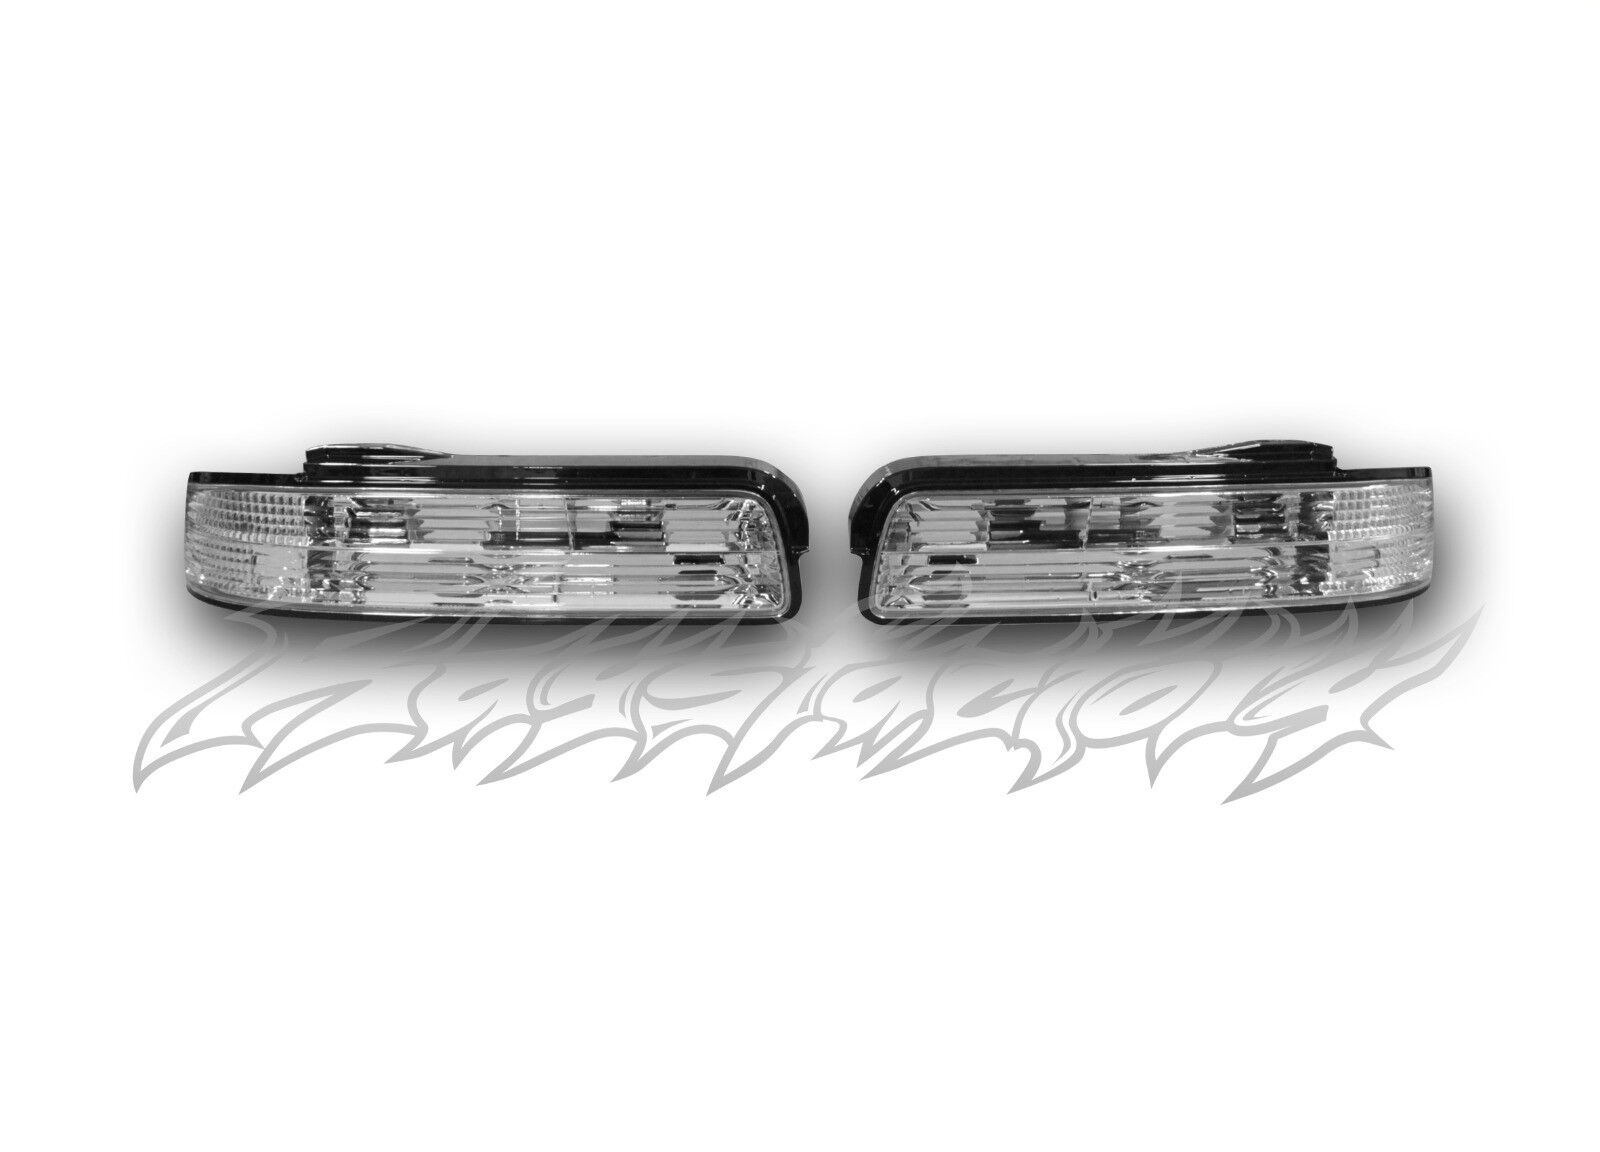 Nissan S13 Silvia (1989-1994 240SX Coupe) All Full Clear Tail Lights